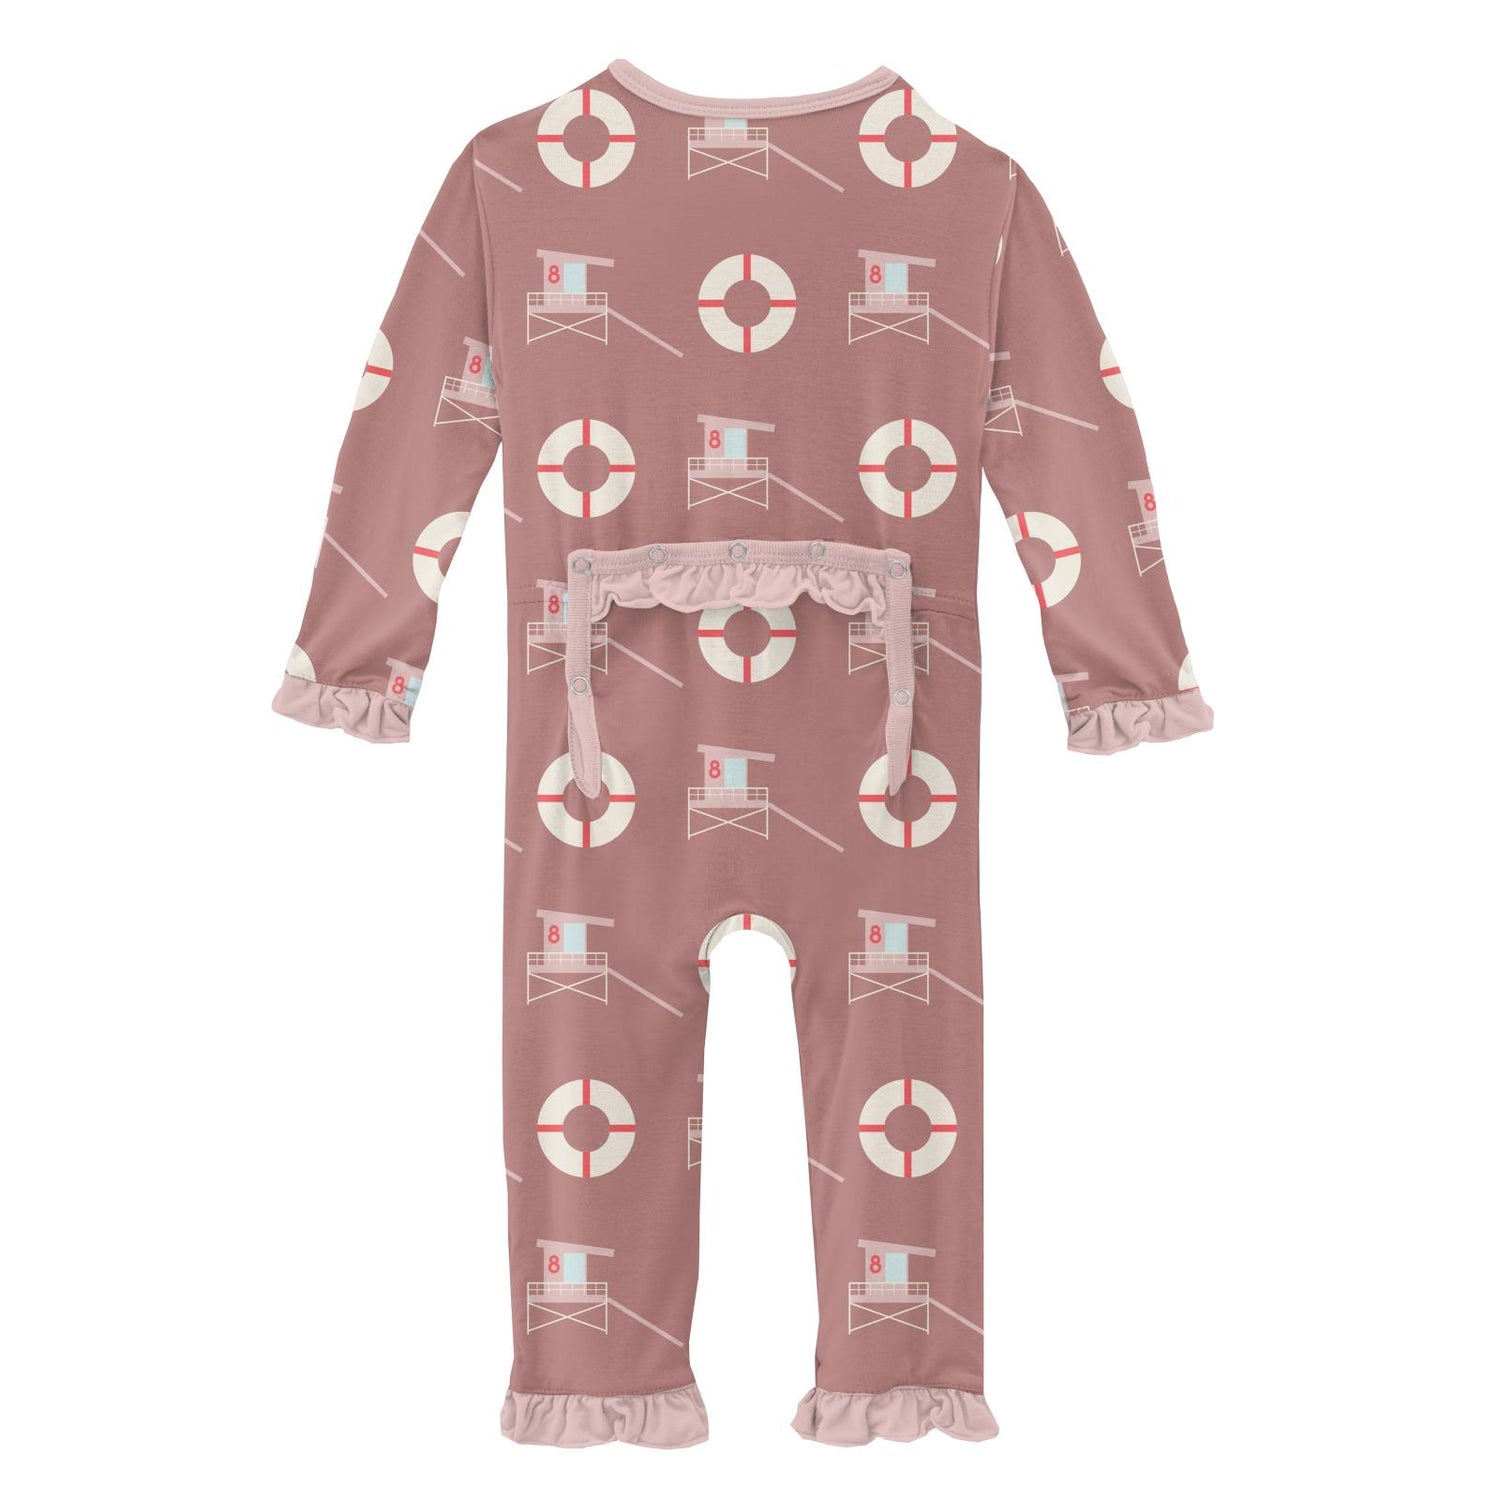 Print Classic Ruffle Coverall with Snaps in Antique Pink Lifeguard